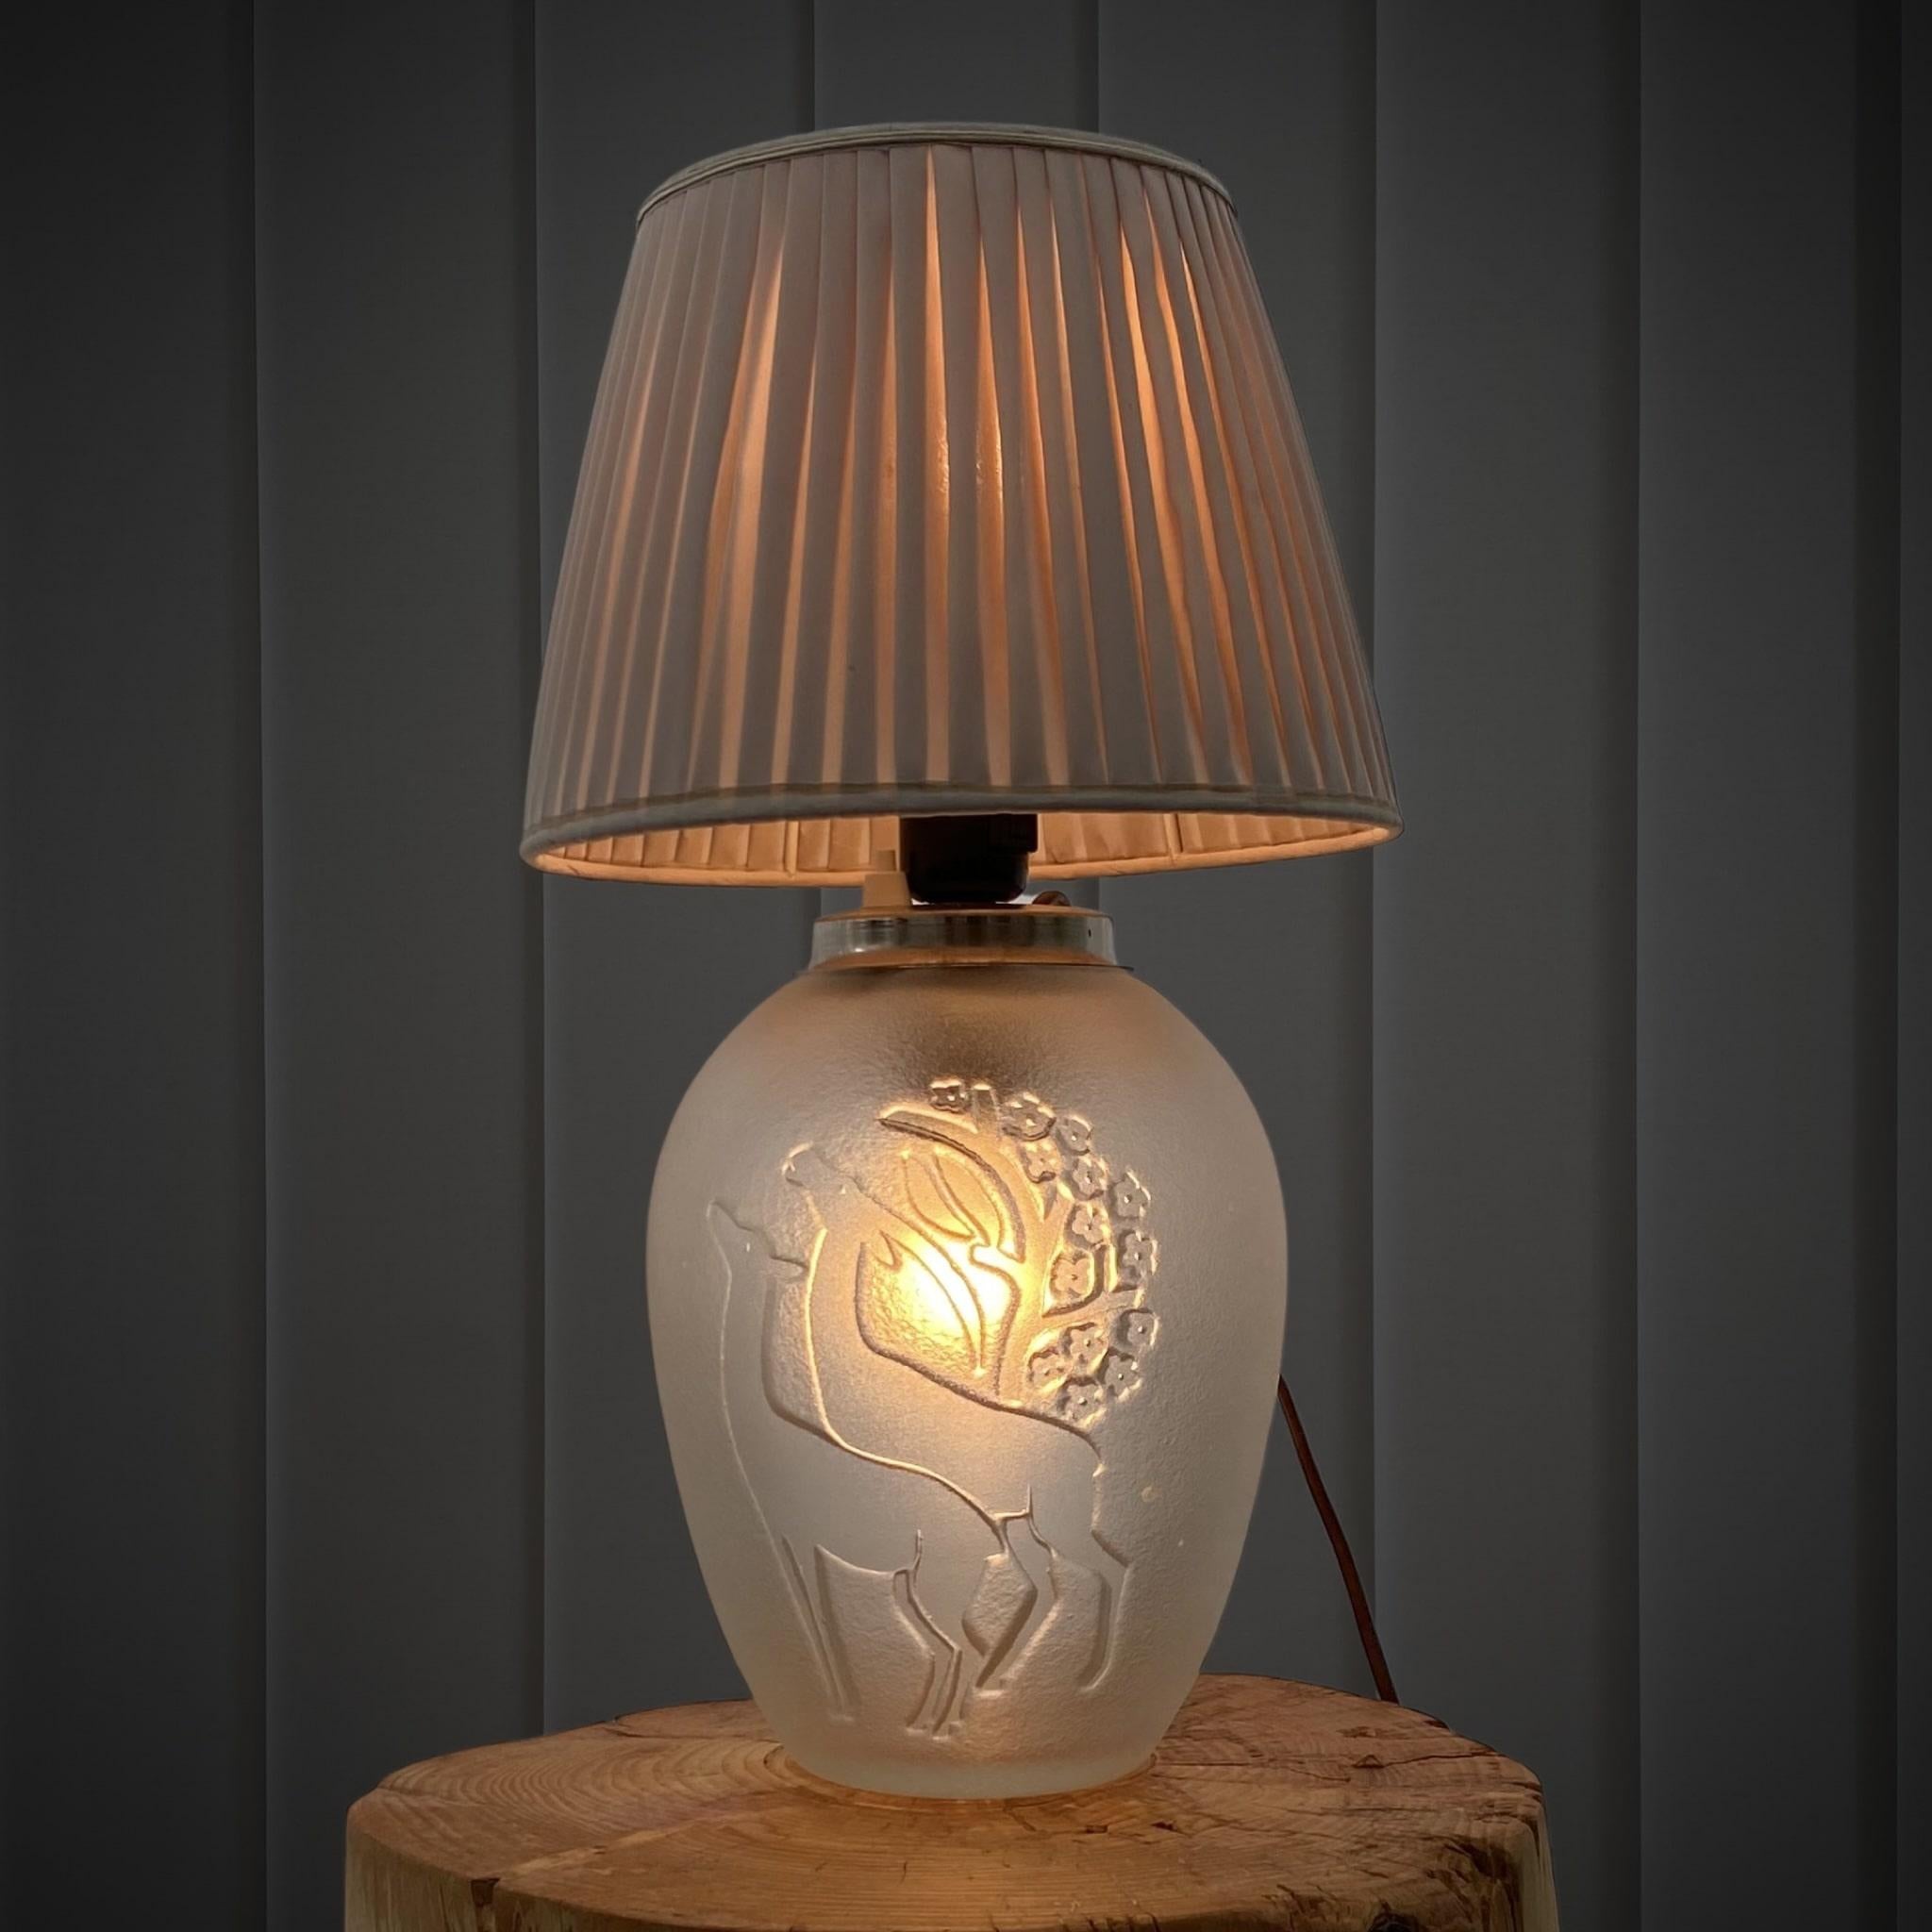 A graceful Swedish art deco table lamp, attributed to the artist Sven-Erik Skawonius, for the glassworks Kosta. No signature. The foot is made from blasted glass with two deer in strong relief. One lamp bulb at the top and one inside the foot.